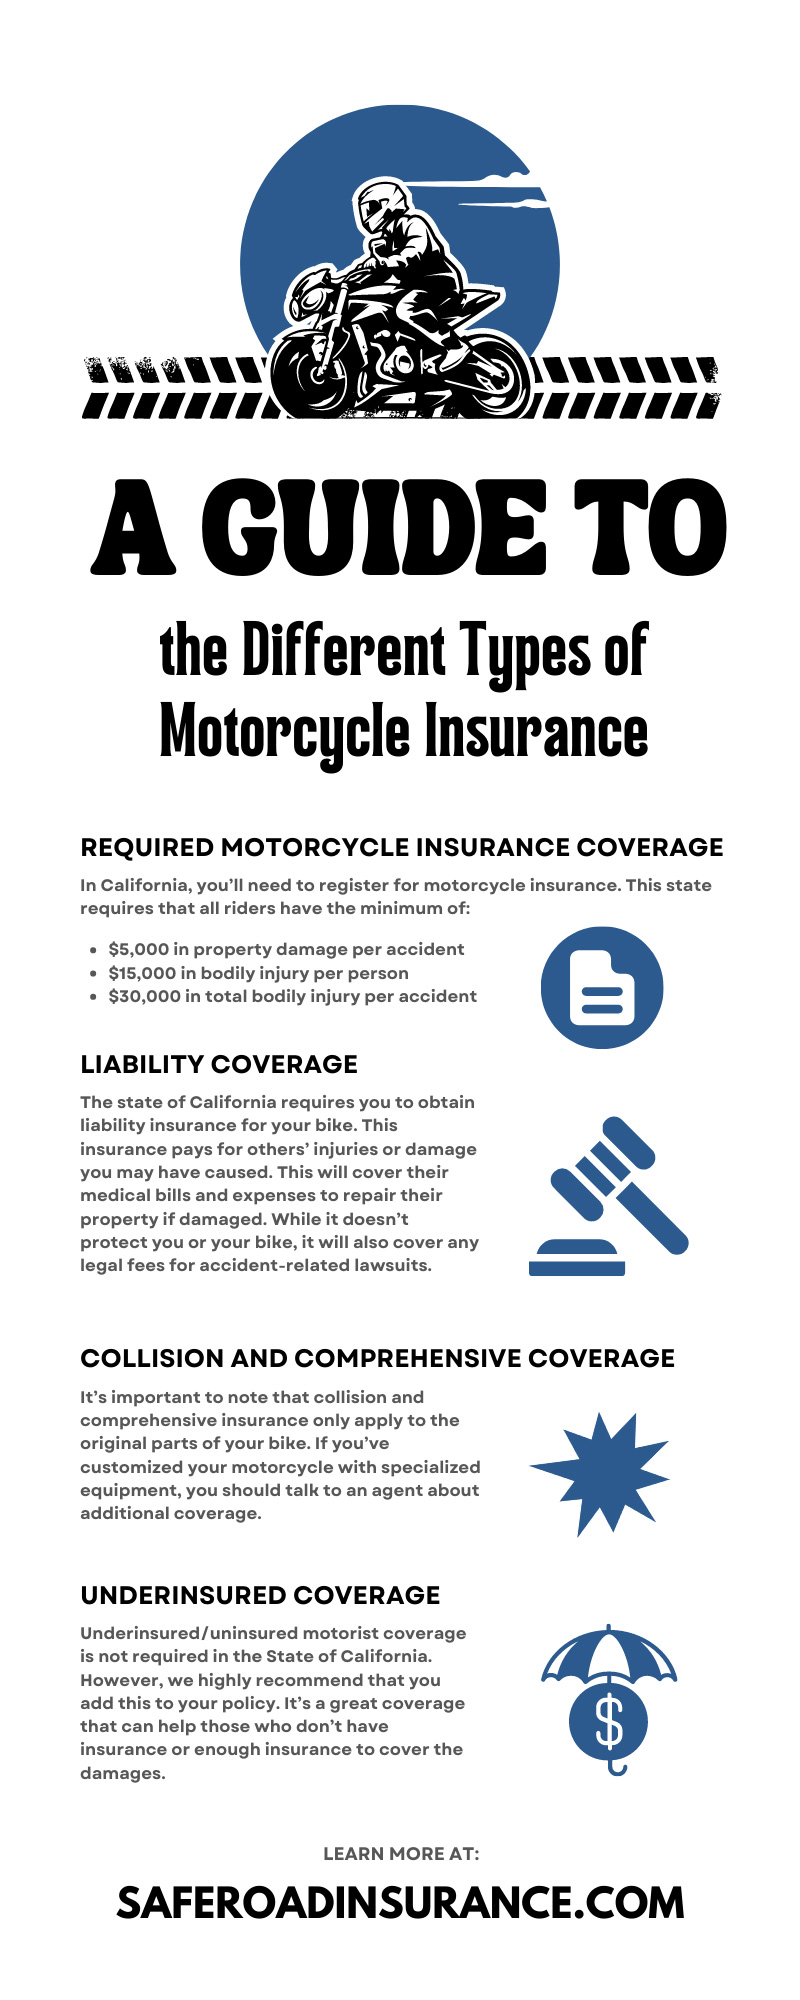 A Guide to the Different Types of Motorcycle Insurance